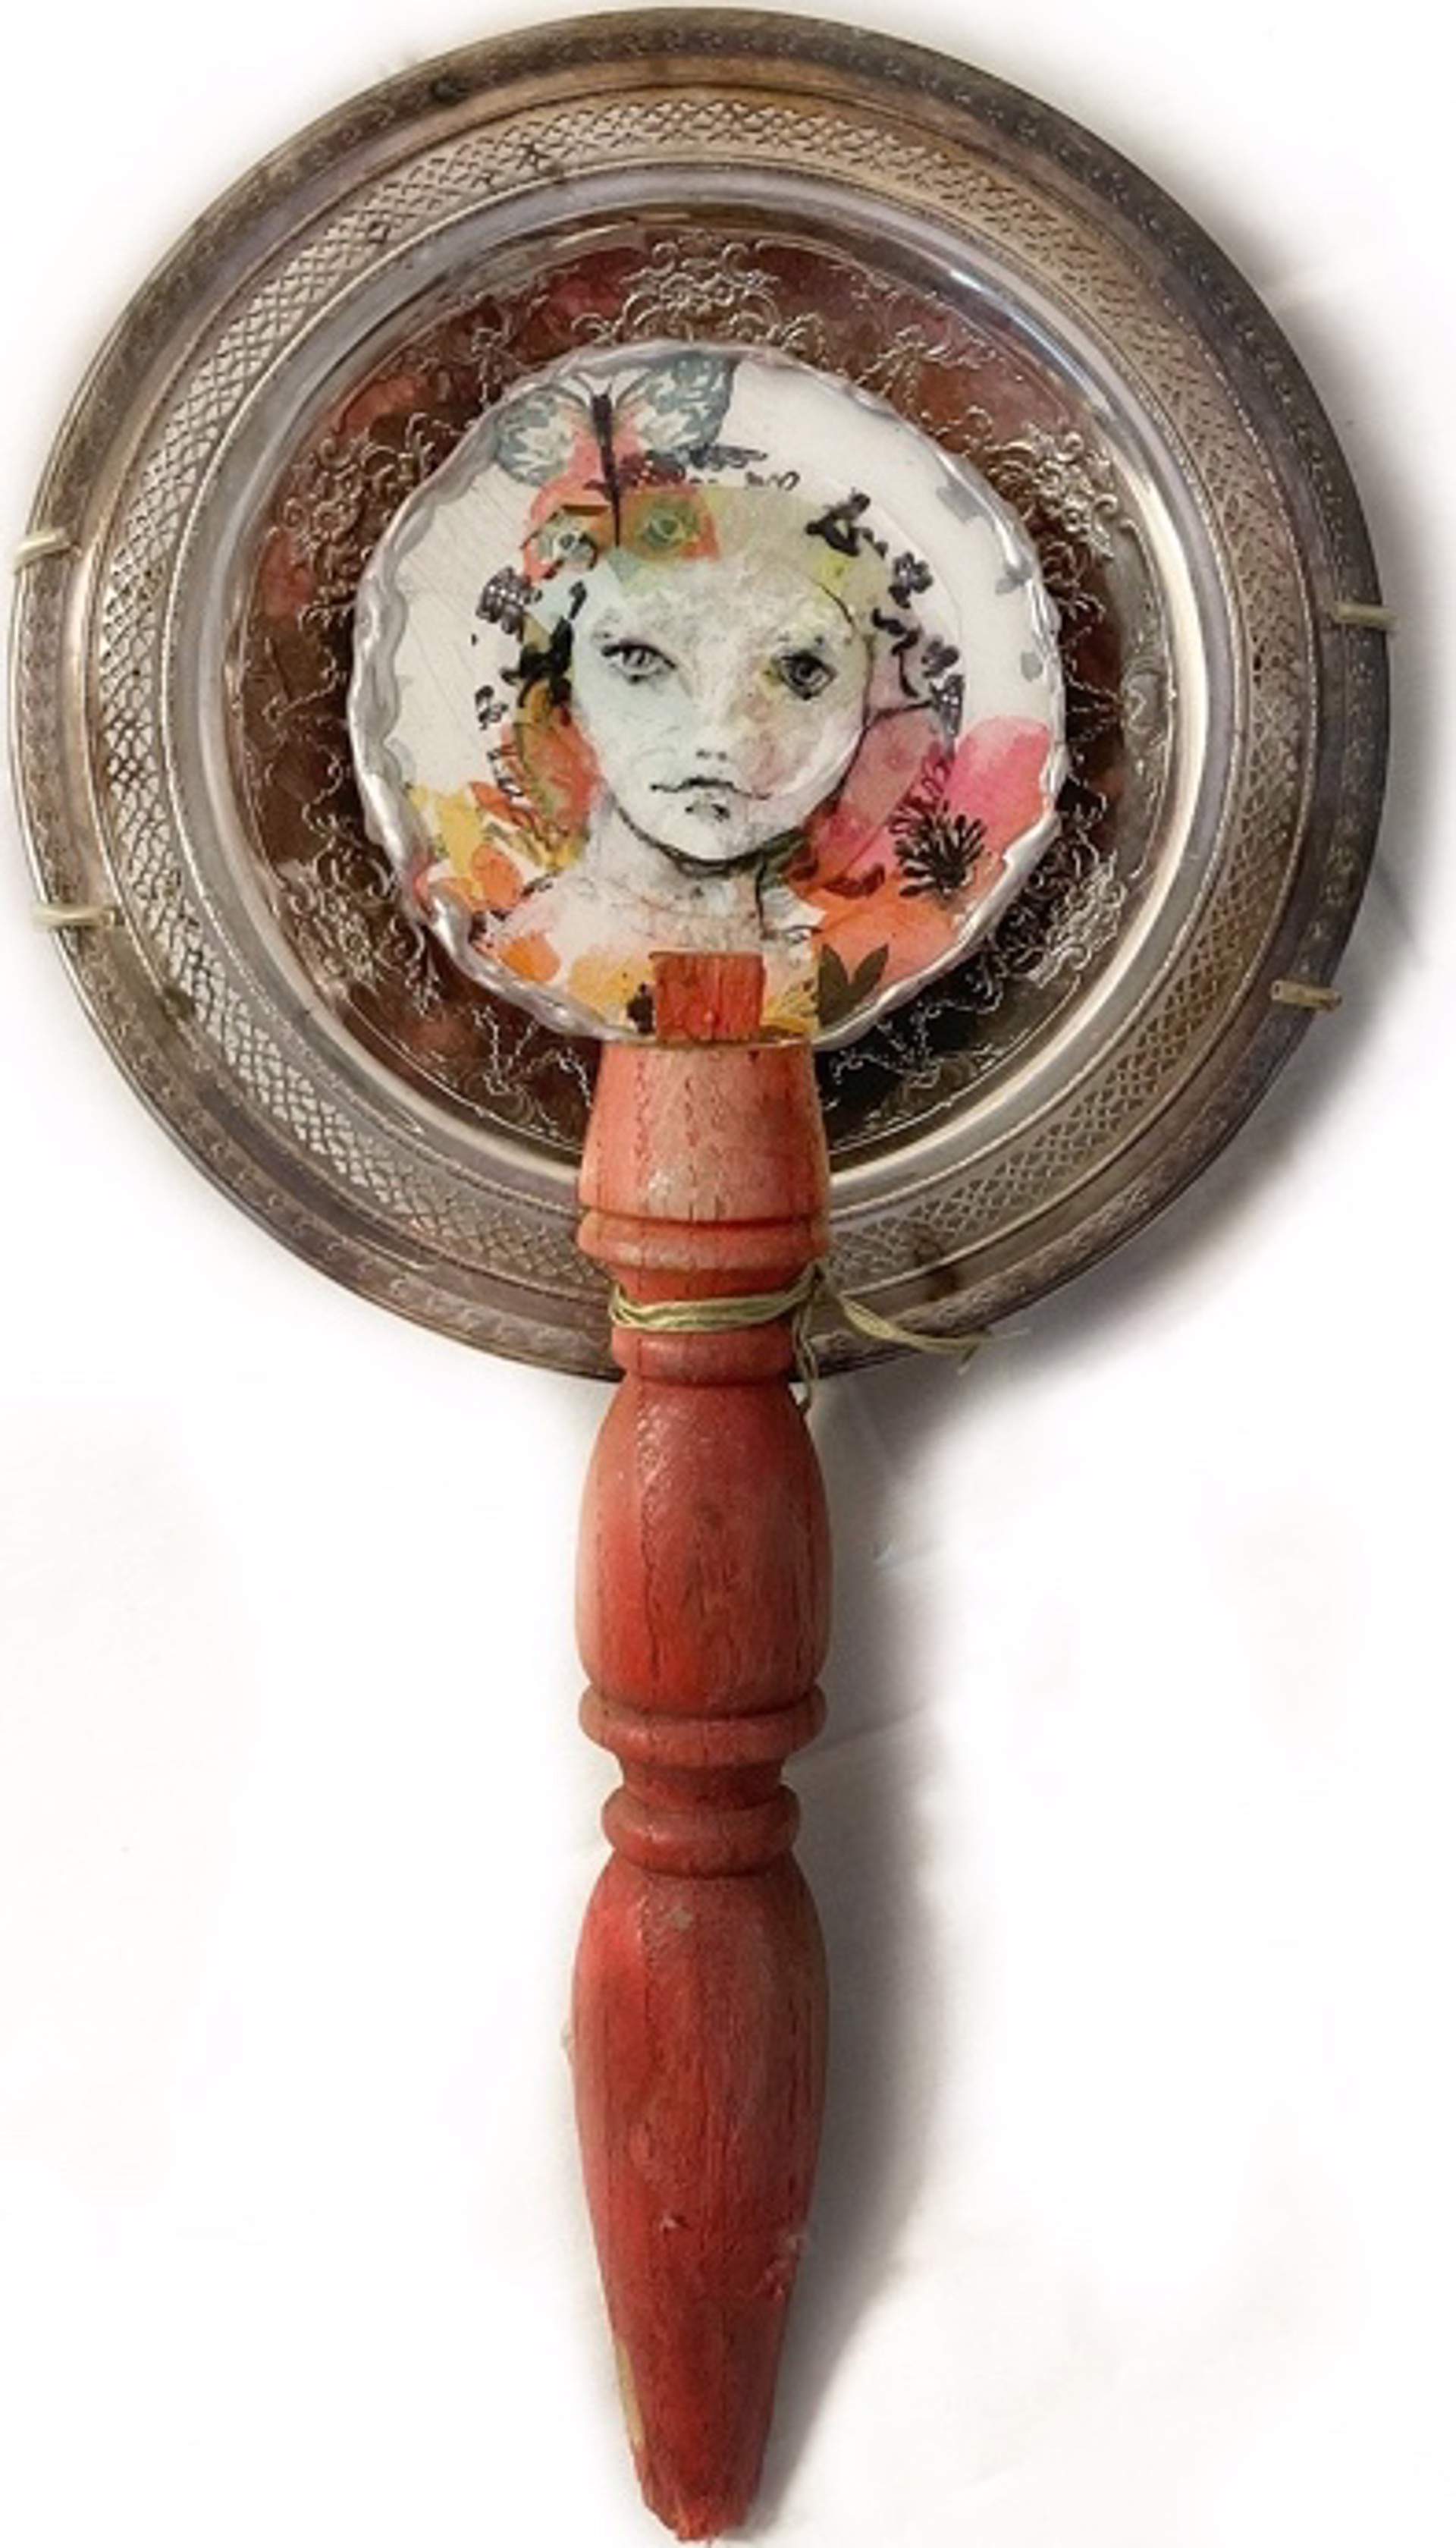 Woven Reflections | Small Face on Silver Plate by Shellie Lewis Crisp